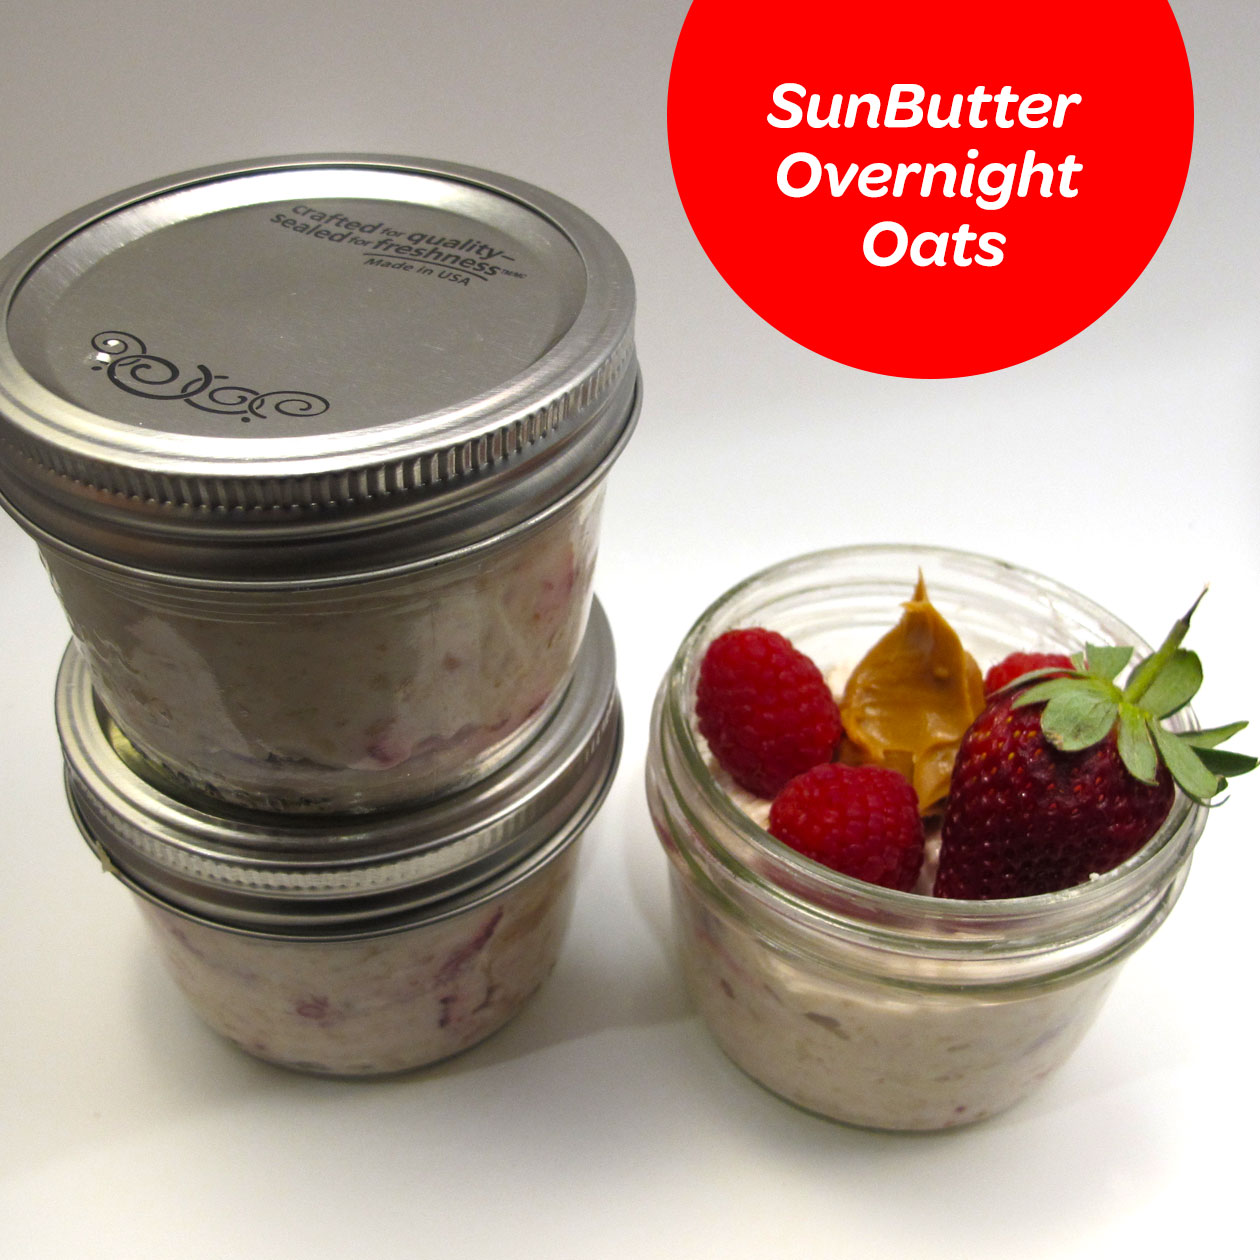 SunButter Overnights Oats are quick to make in the evening for a less stressed, nutritious breakfast!